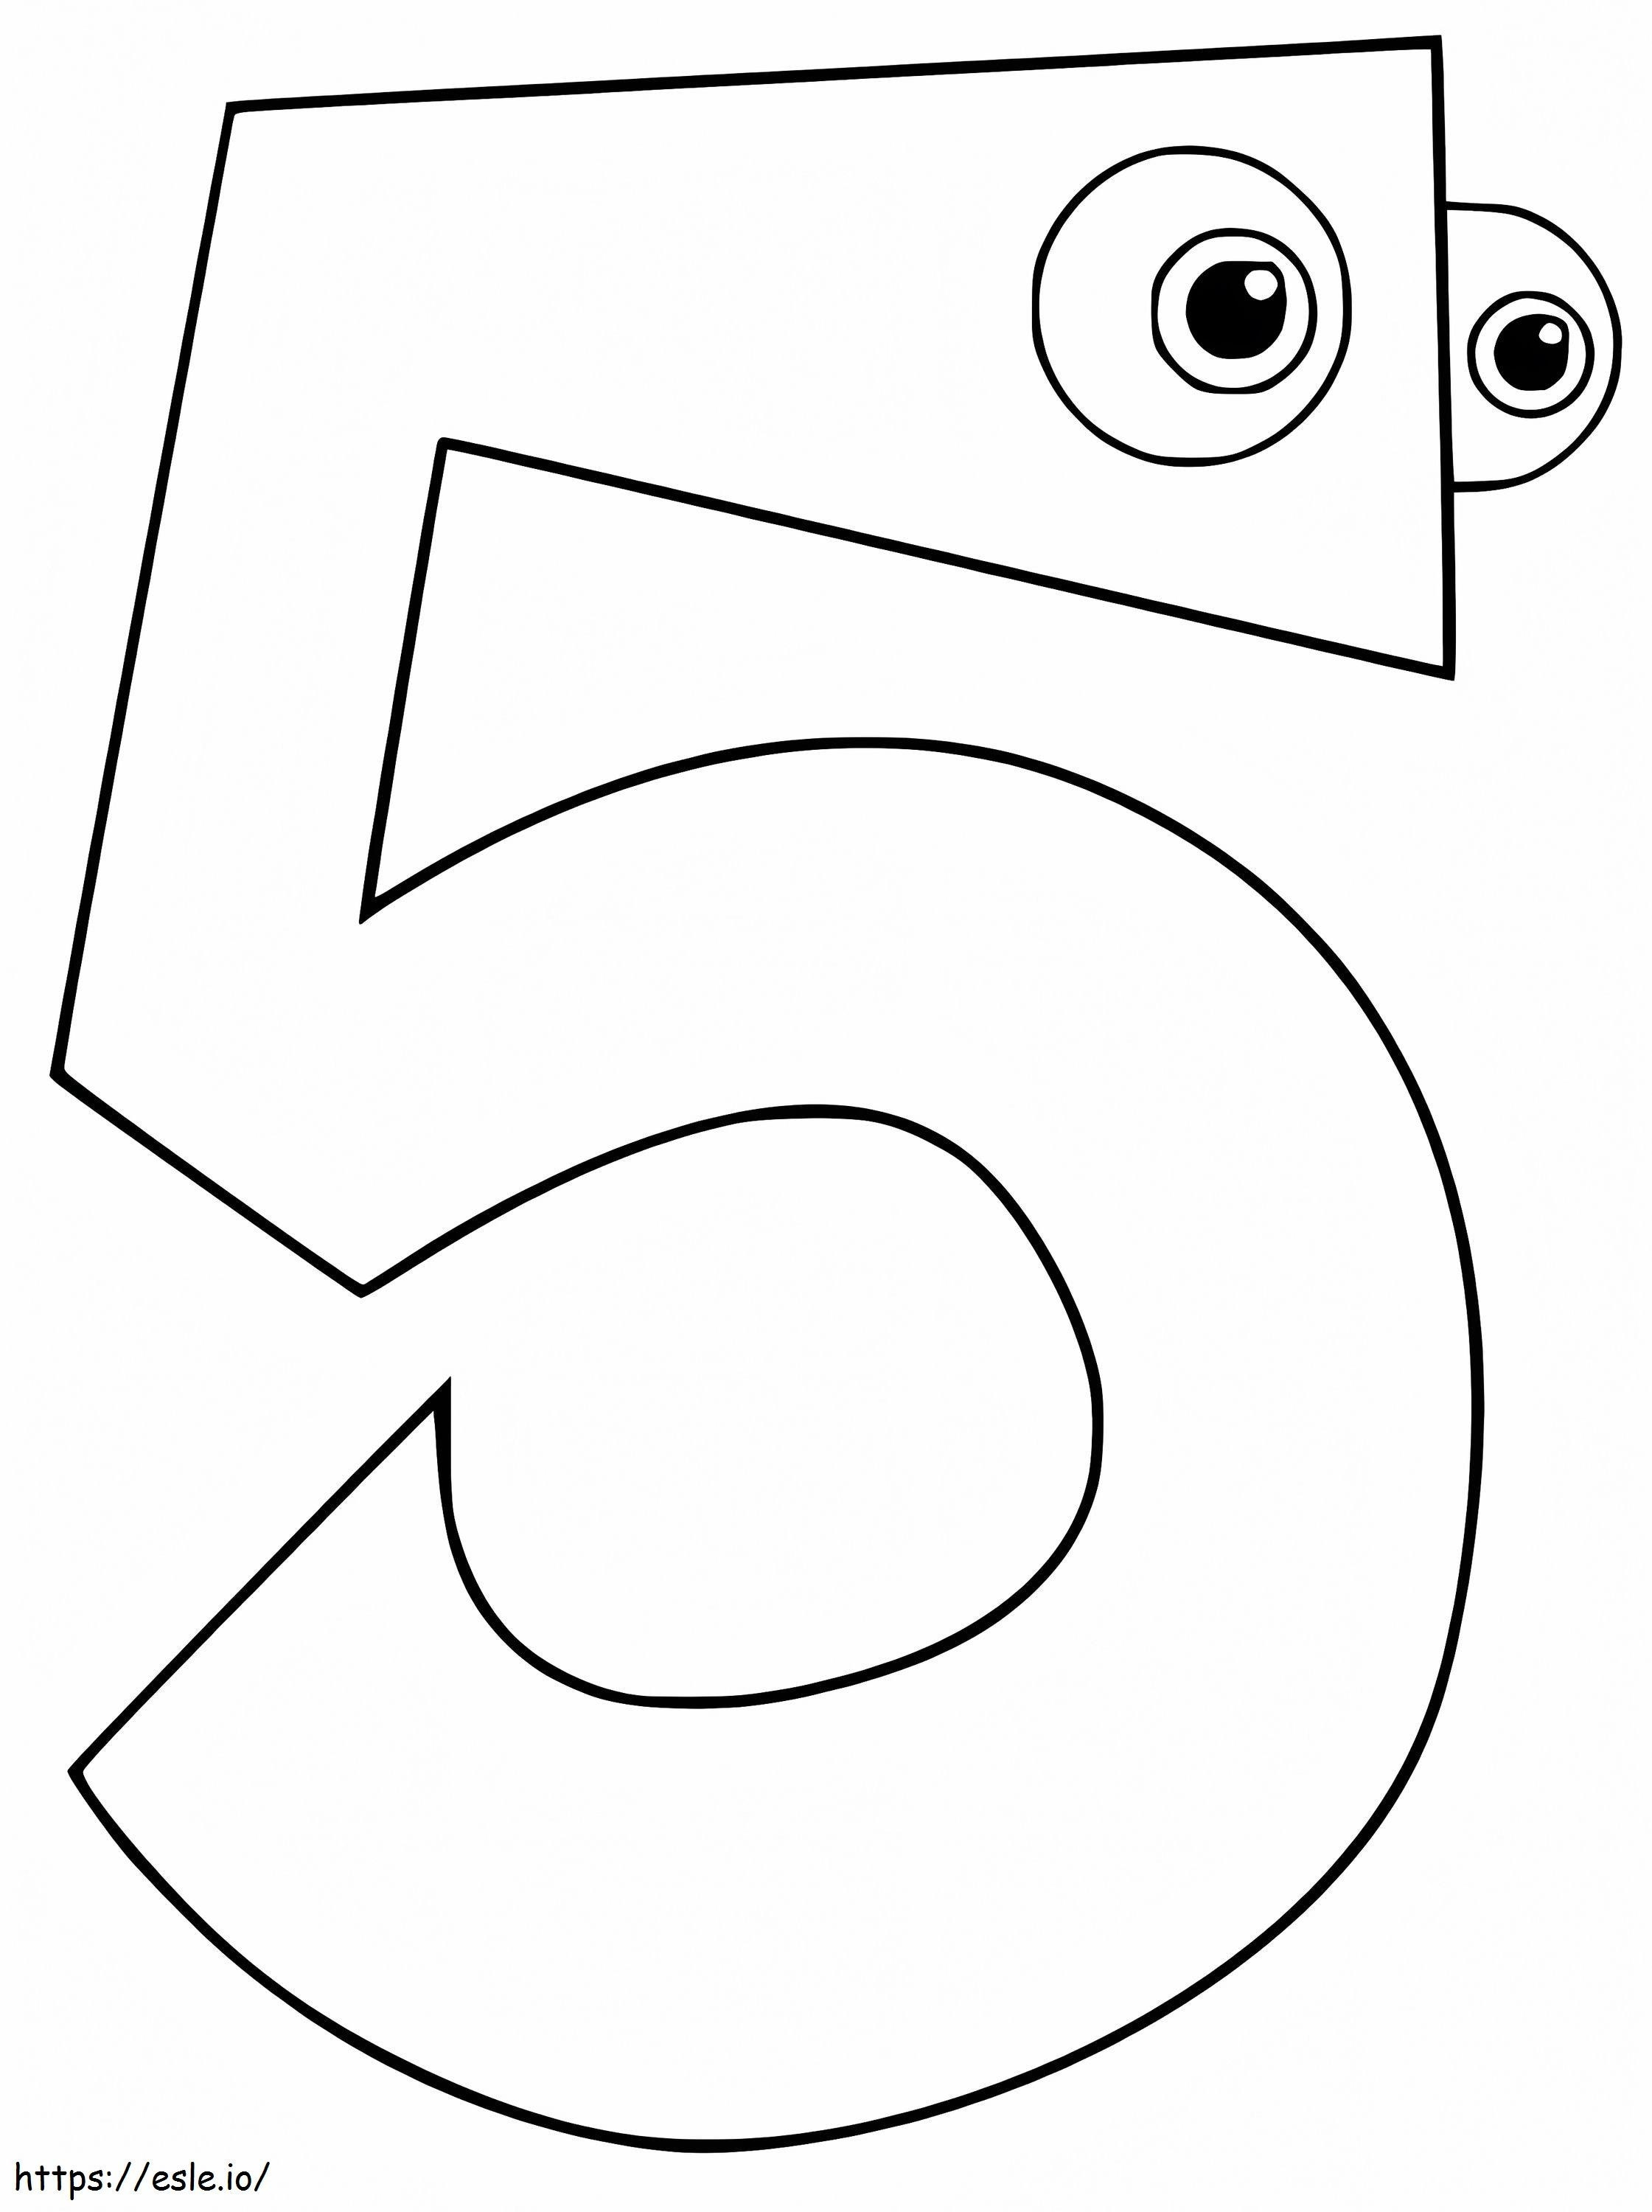 Funny Number 5 coloring page